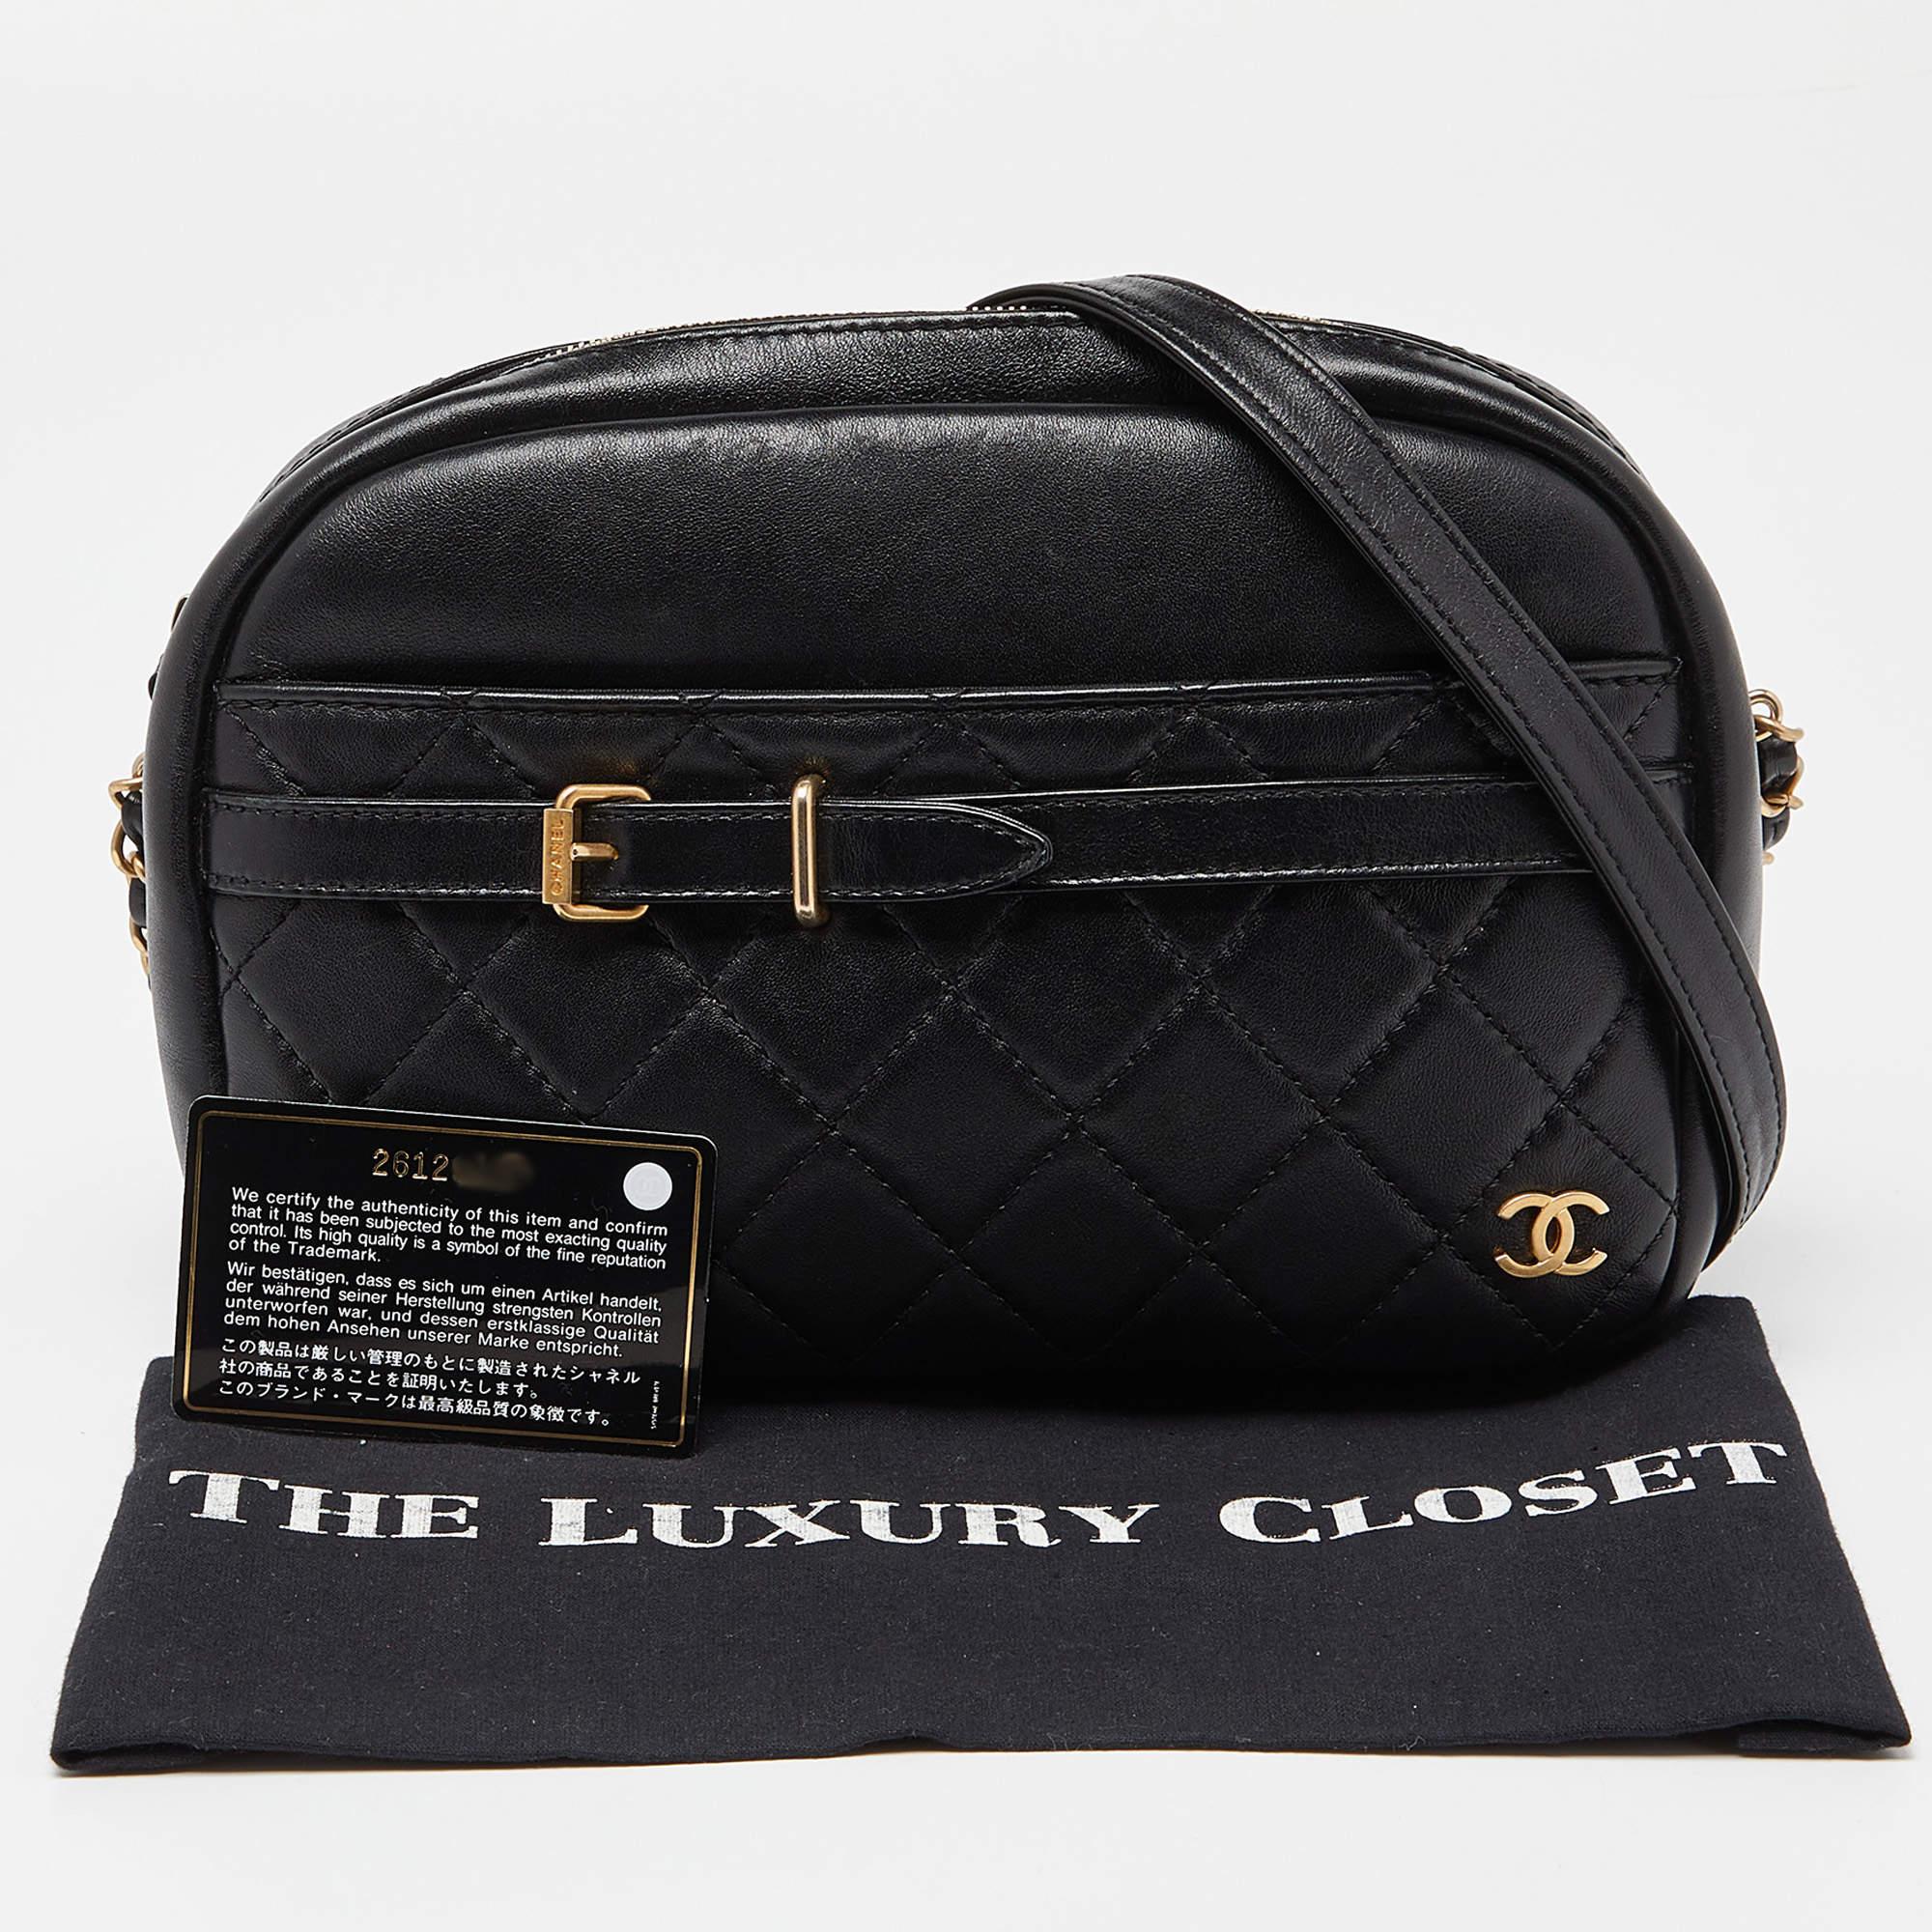 Chanel Black Quilted Leather Buckle Camera Case Bag 8